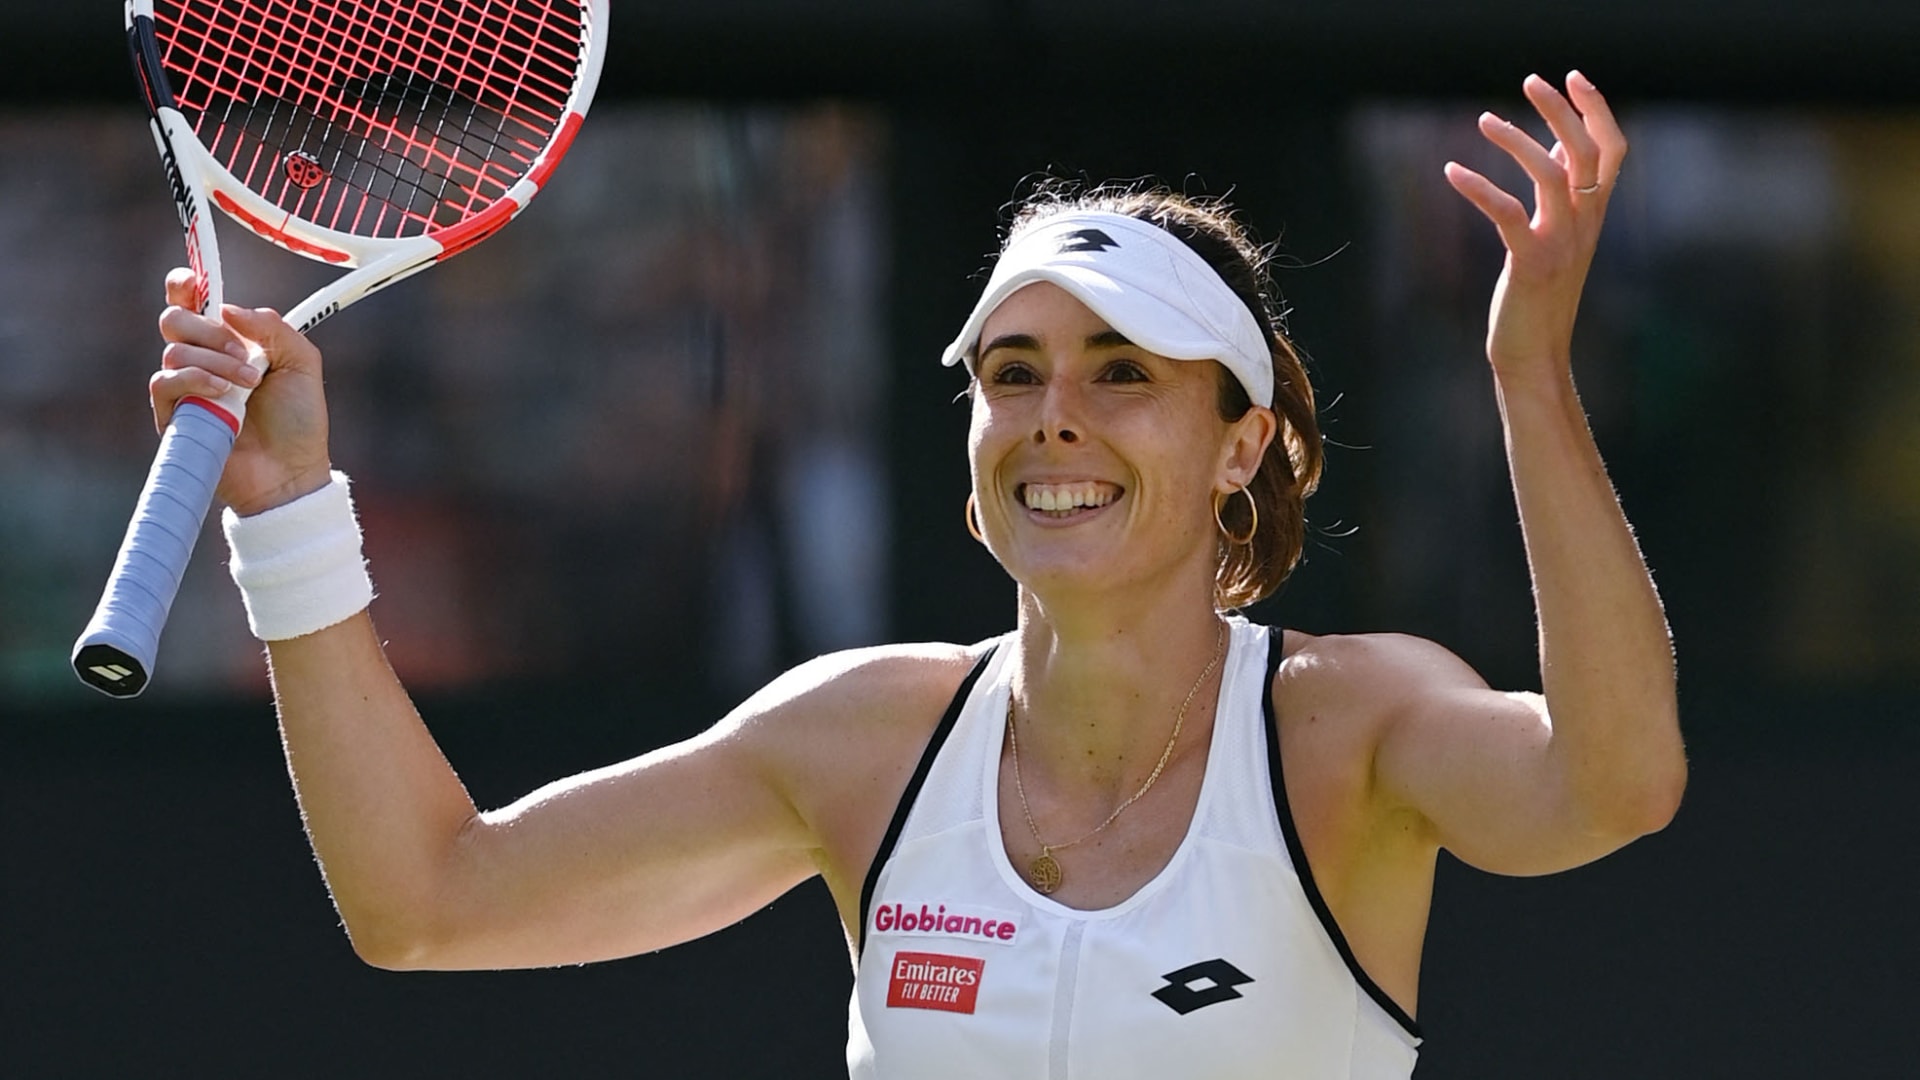 Alizé Cornet will continue playing through